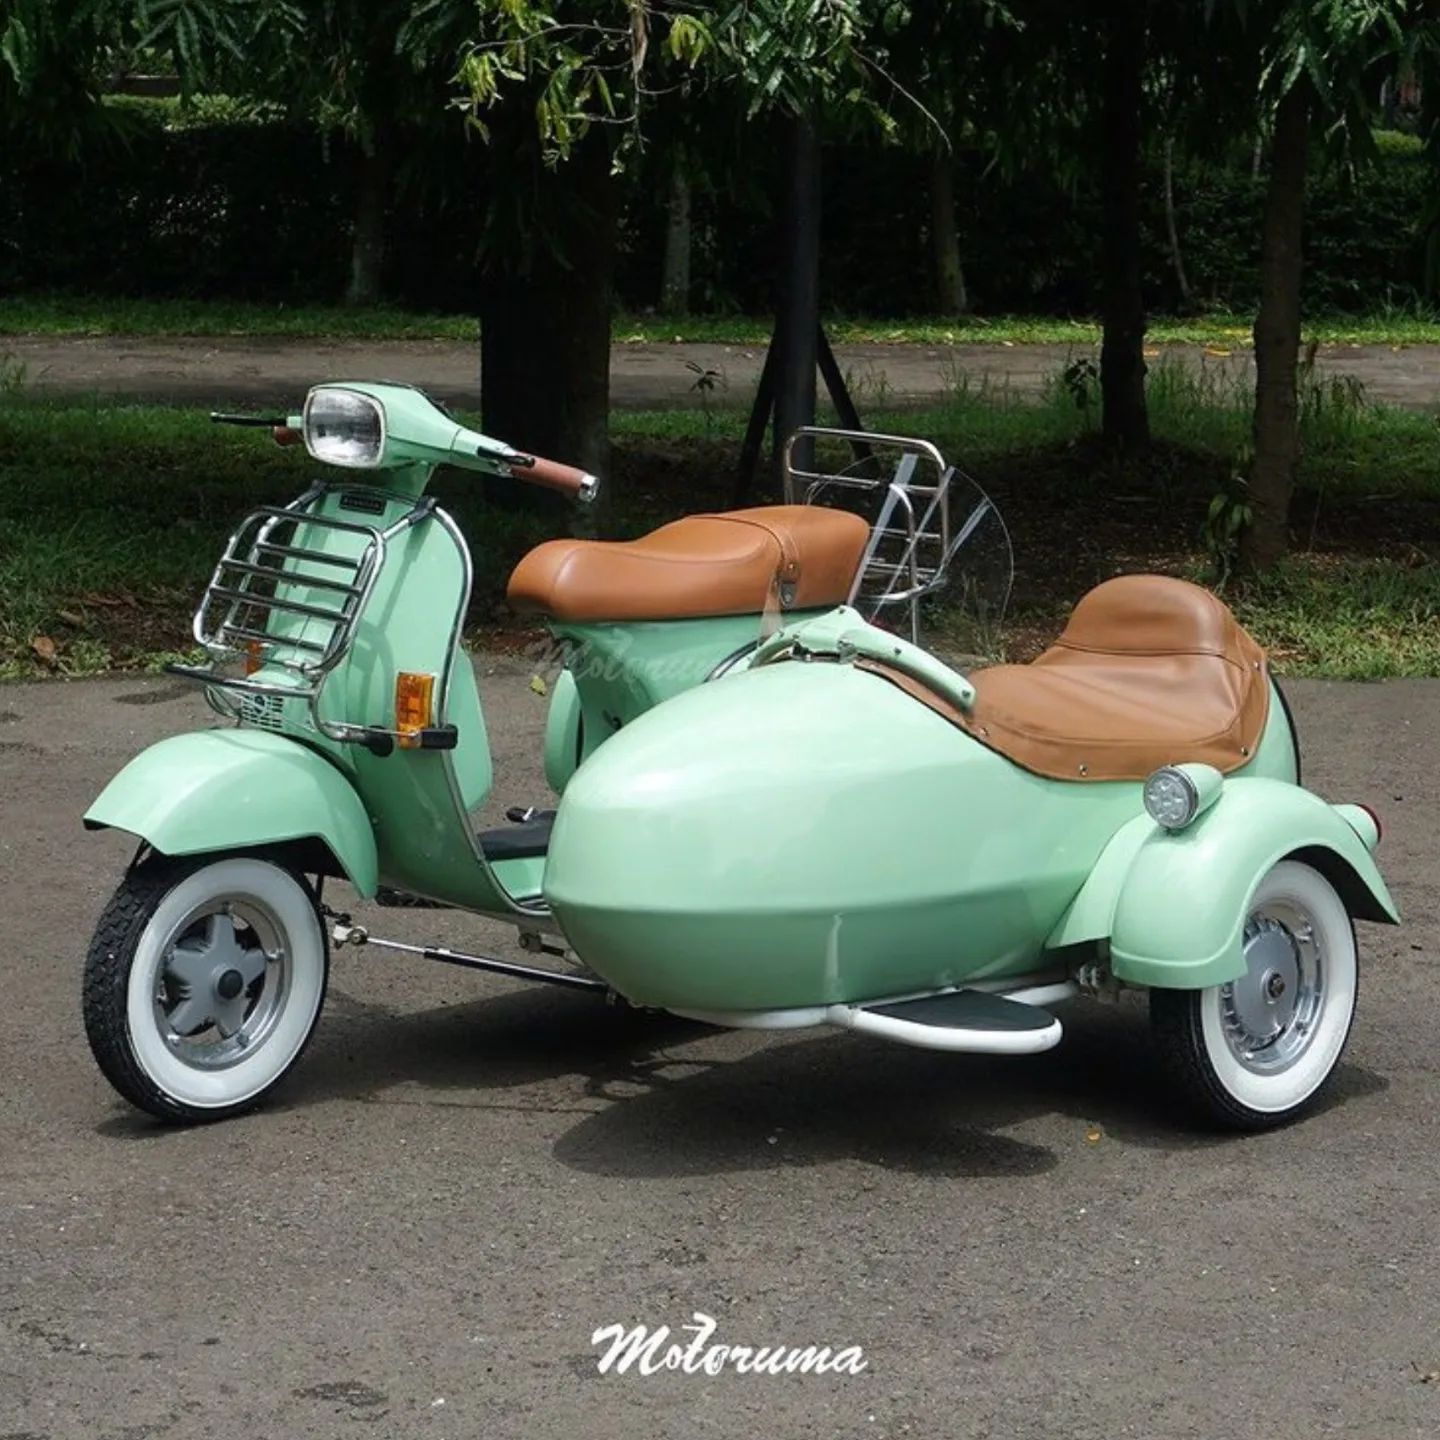 Green Vespa PX sidecar

Hashtag and mention @vespapxnet for feature repost
Check website www.vespapx.net for more 

Sidecar cek @vesparkindo 

feature @motoruma.id